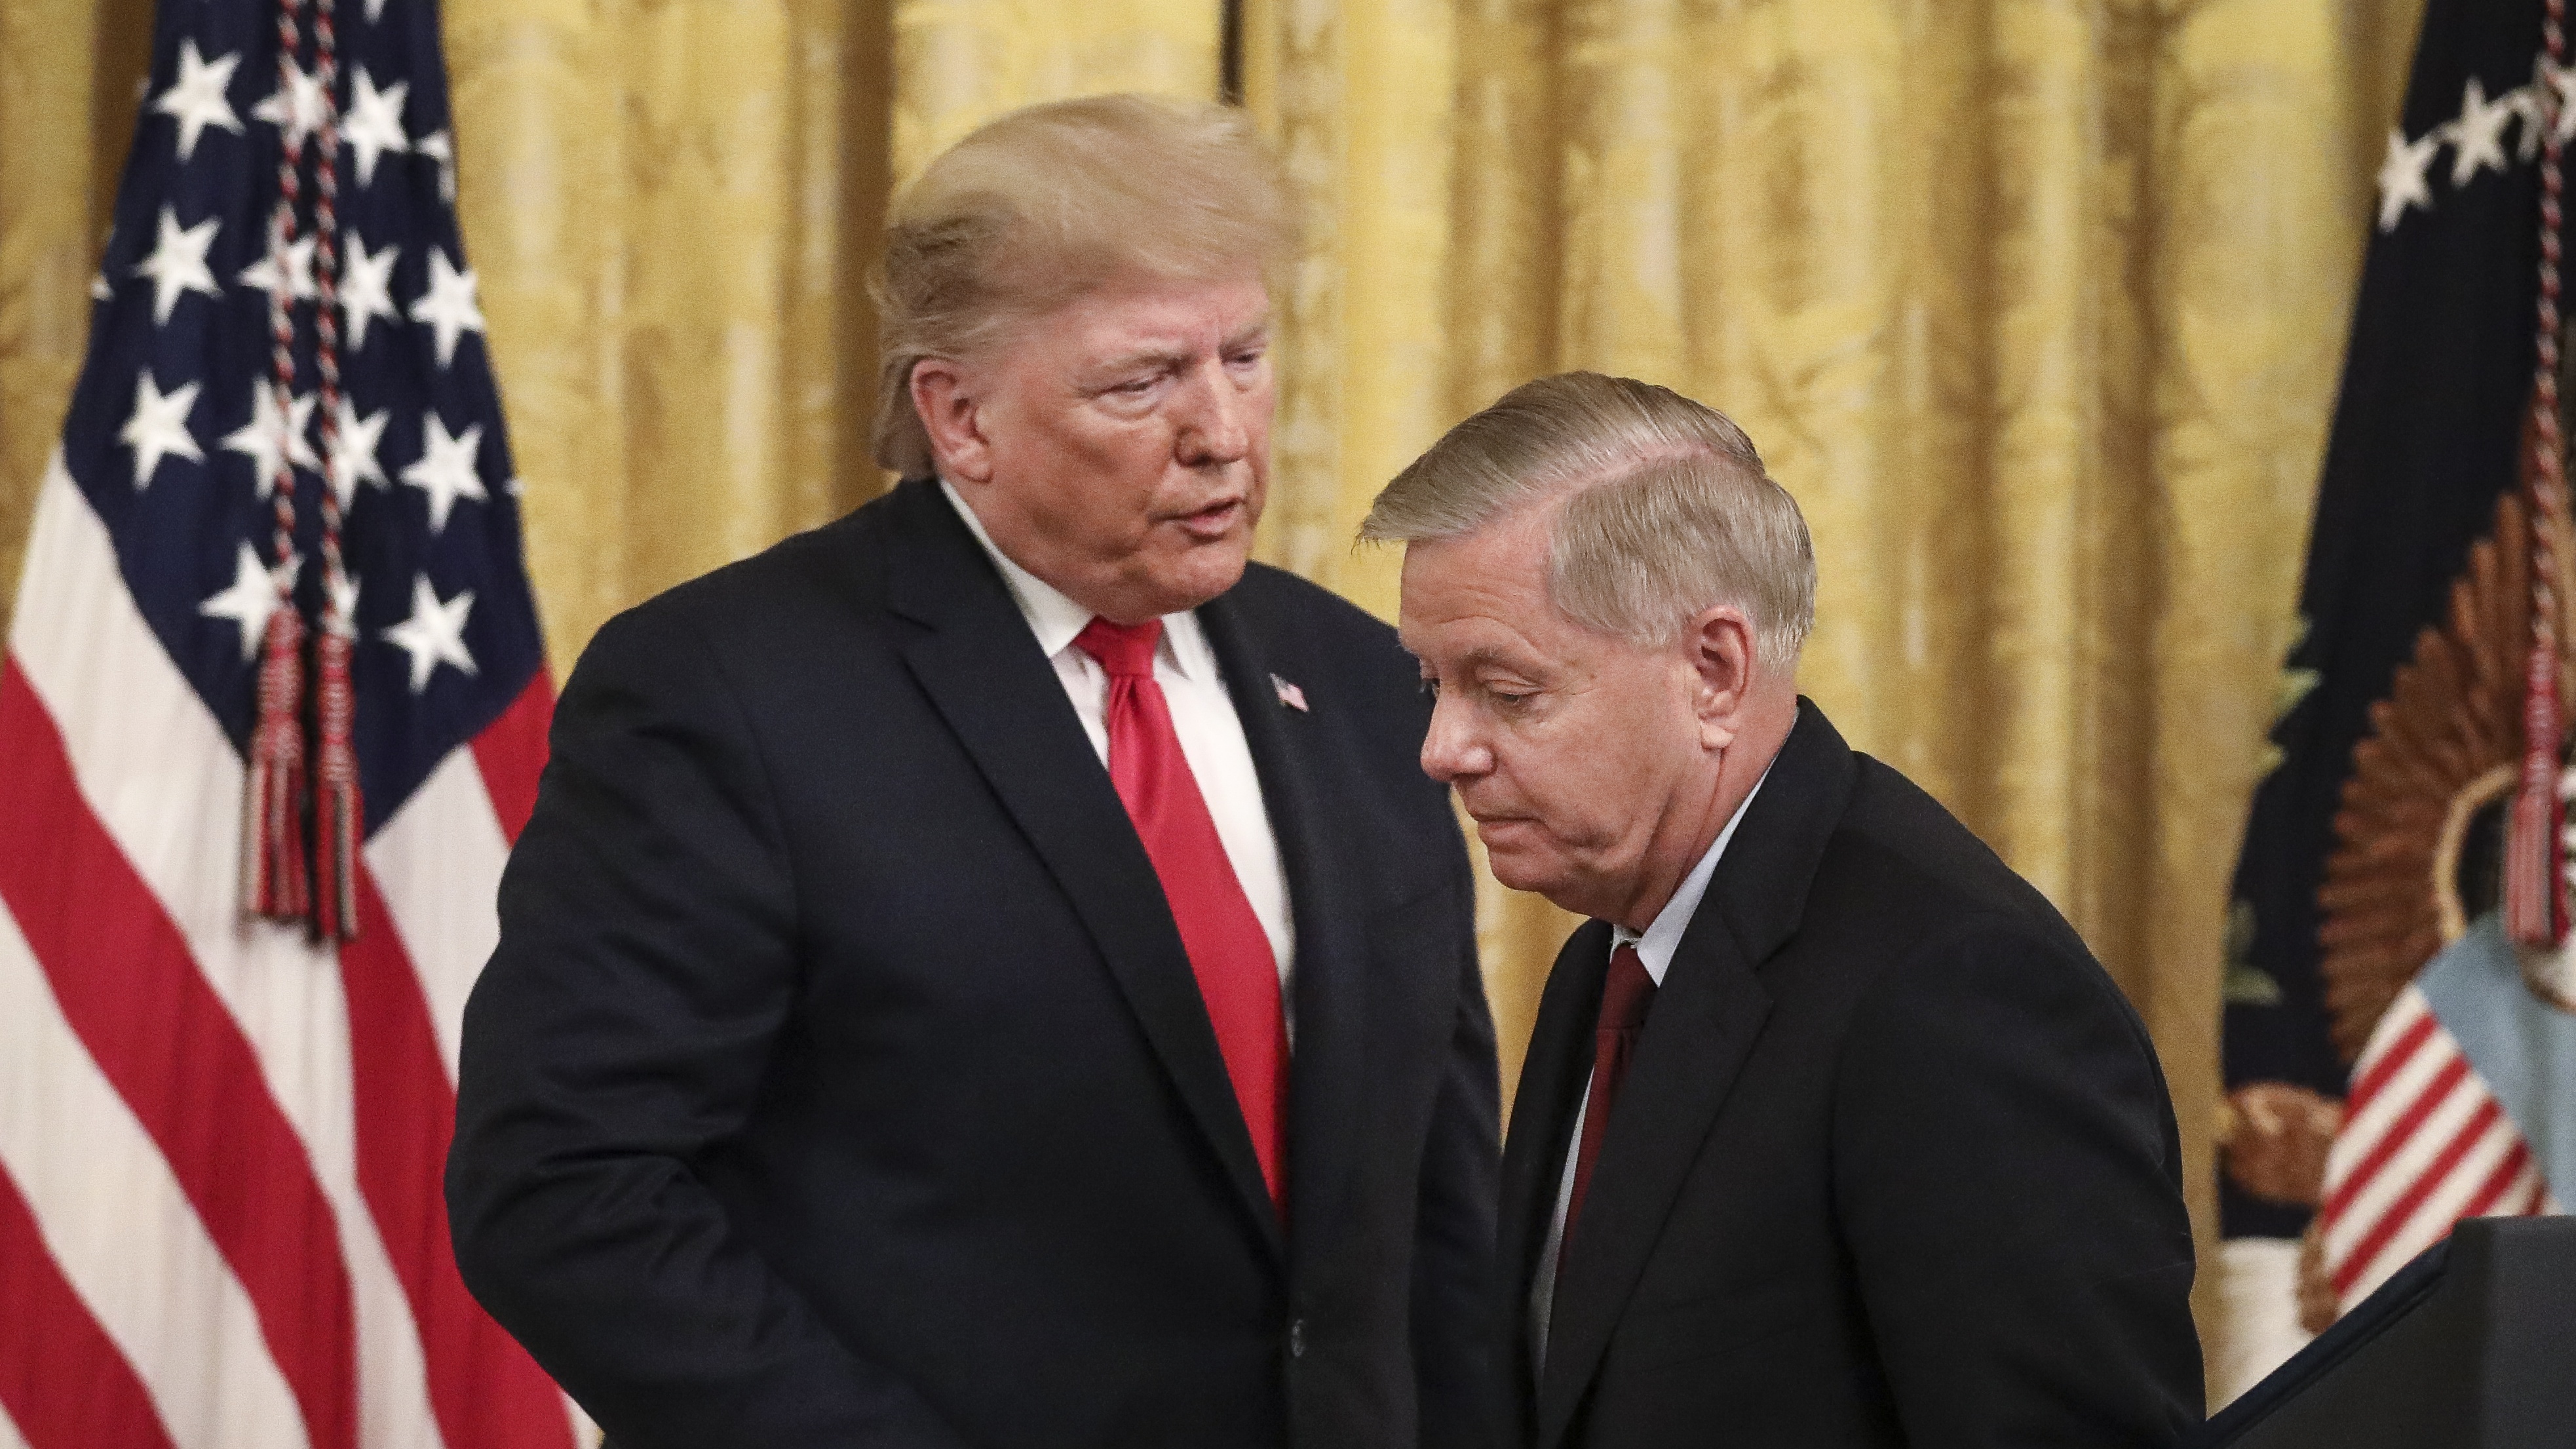 Donald Trump with Lindsey Graham during an event at the White House